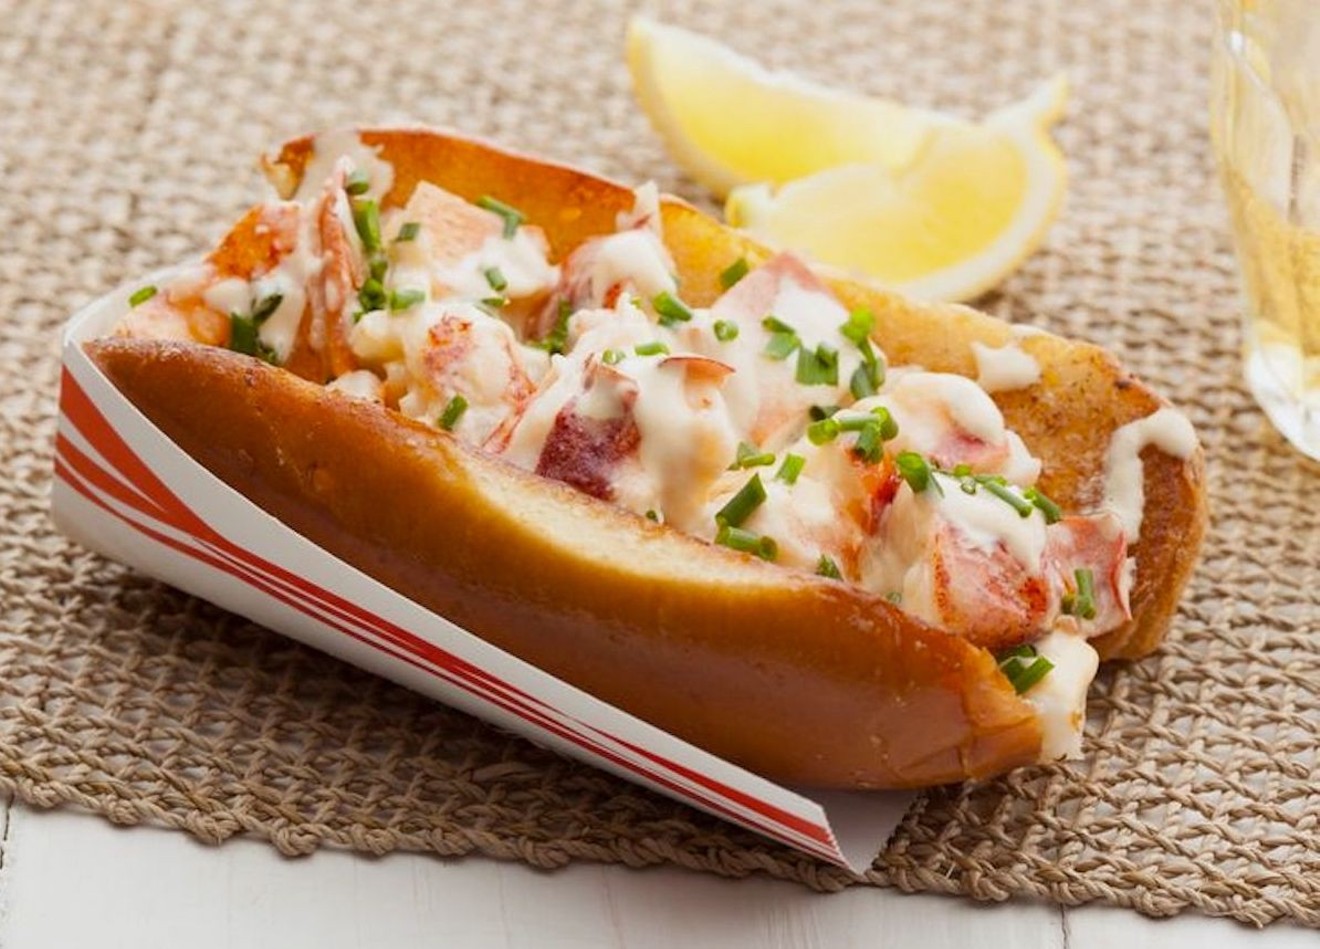 Expect to find Zakarian's version of the lobster roll, prepared with his own mustard-mayo blend, on the Point Royal menu.